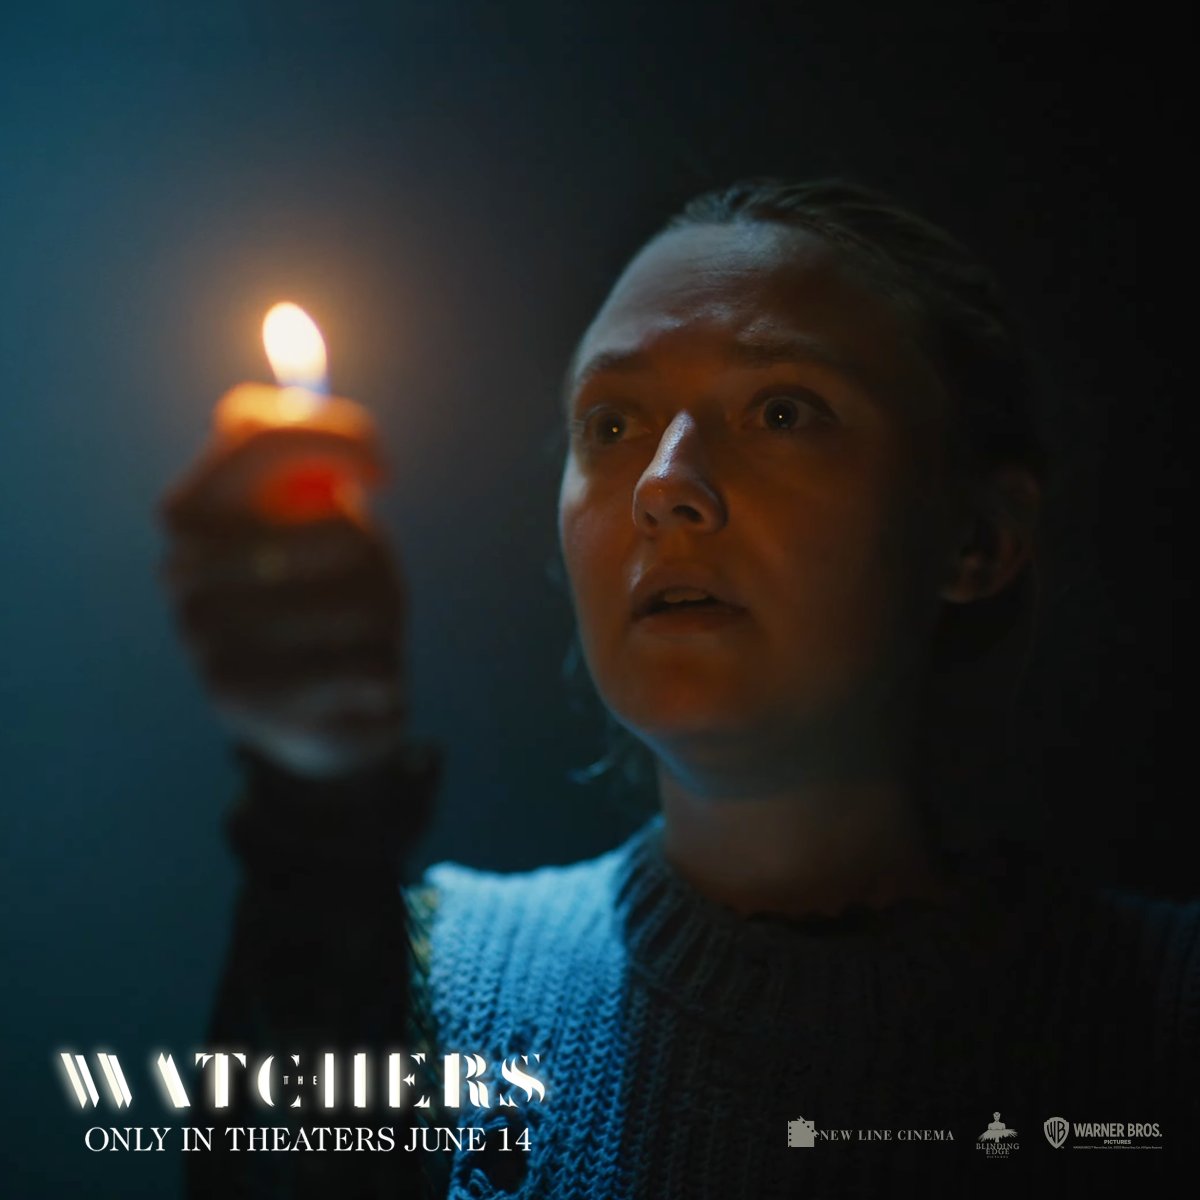 Do you want to know what they are? But be careful, they're always watching you. #TheWatchers - In Theaters June 14.